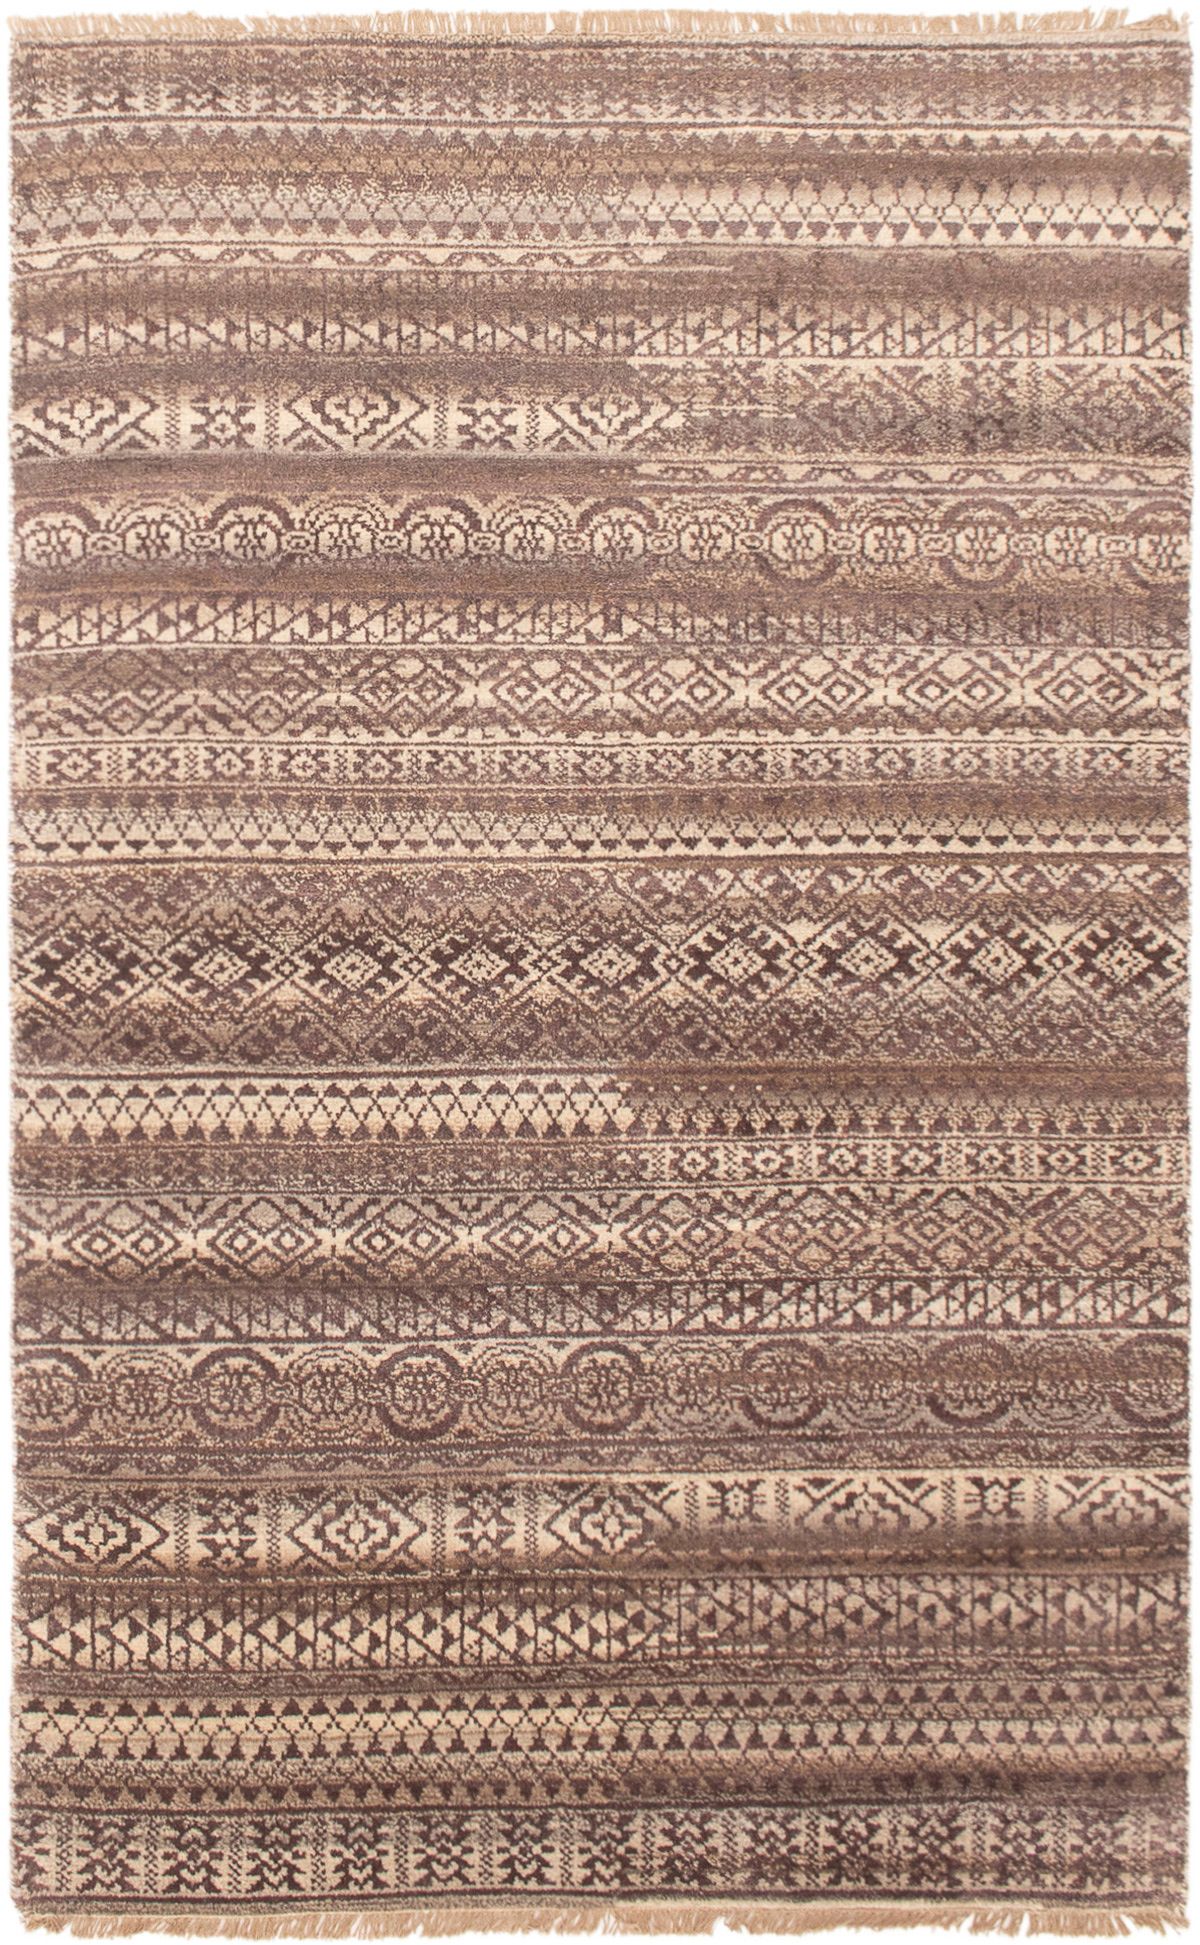 Hand-knotted Tangier Dark Brown Wool Rug 4'11" x 7'11" Size: 4'11" x 7'11"  